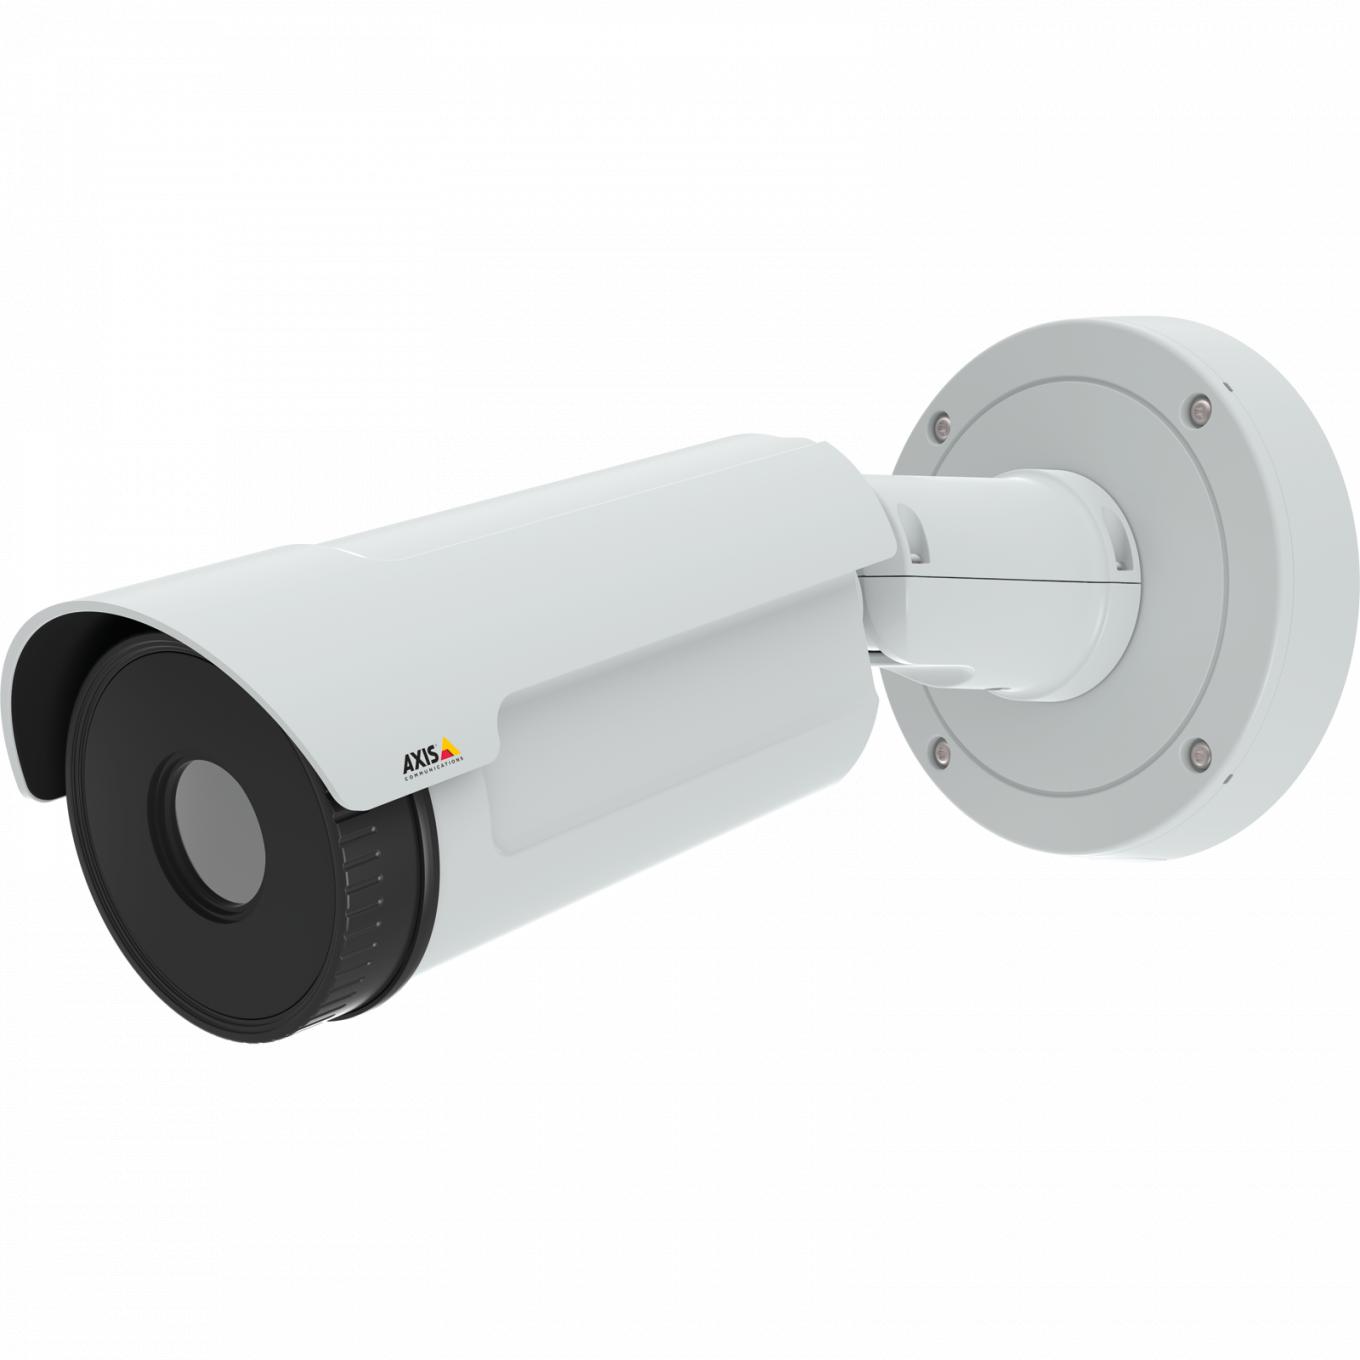 AXIS Q1942-E Thermal IP Camera mounted on wall viewed from left